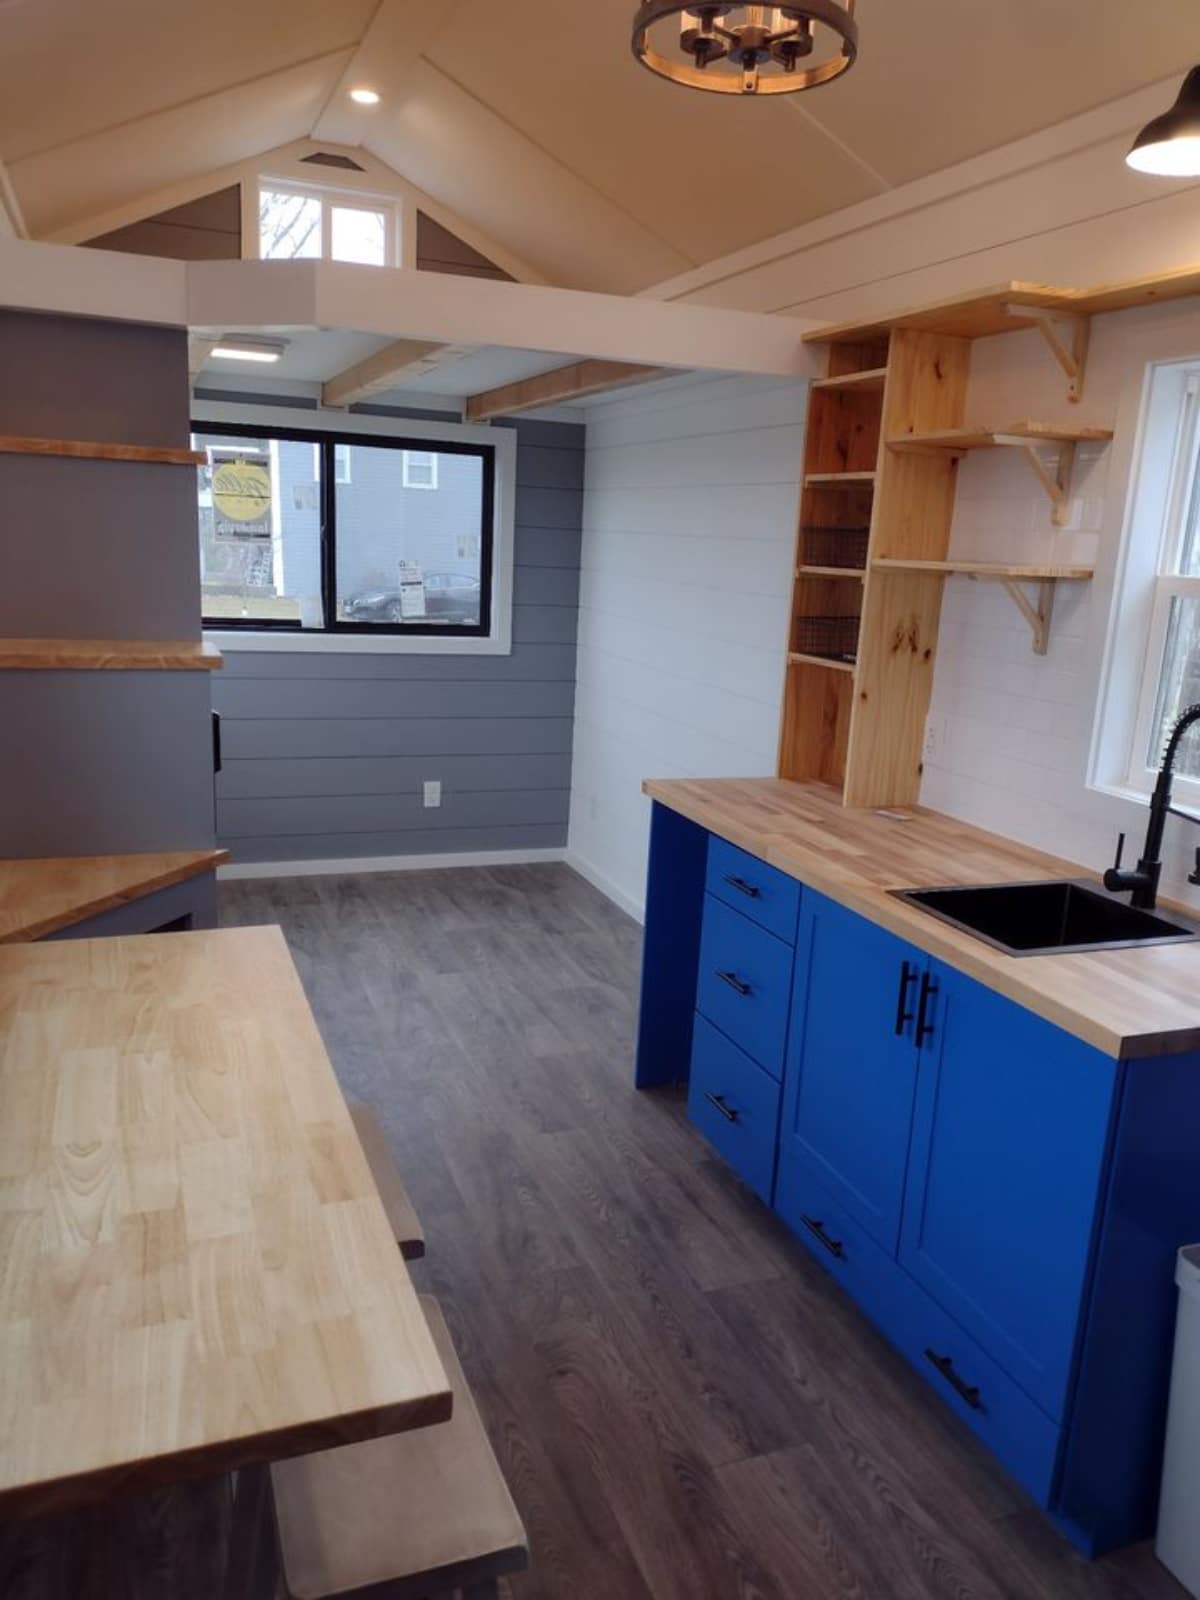 Living area of 27' Tiny Home on Wheel